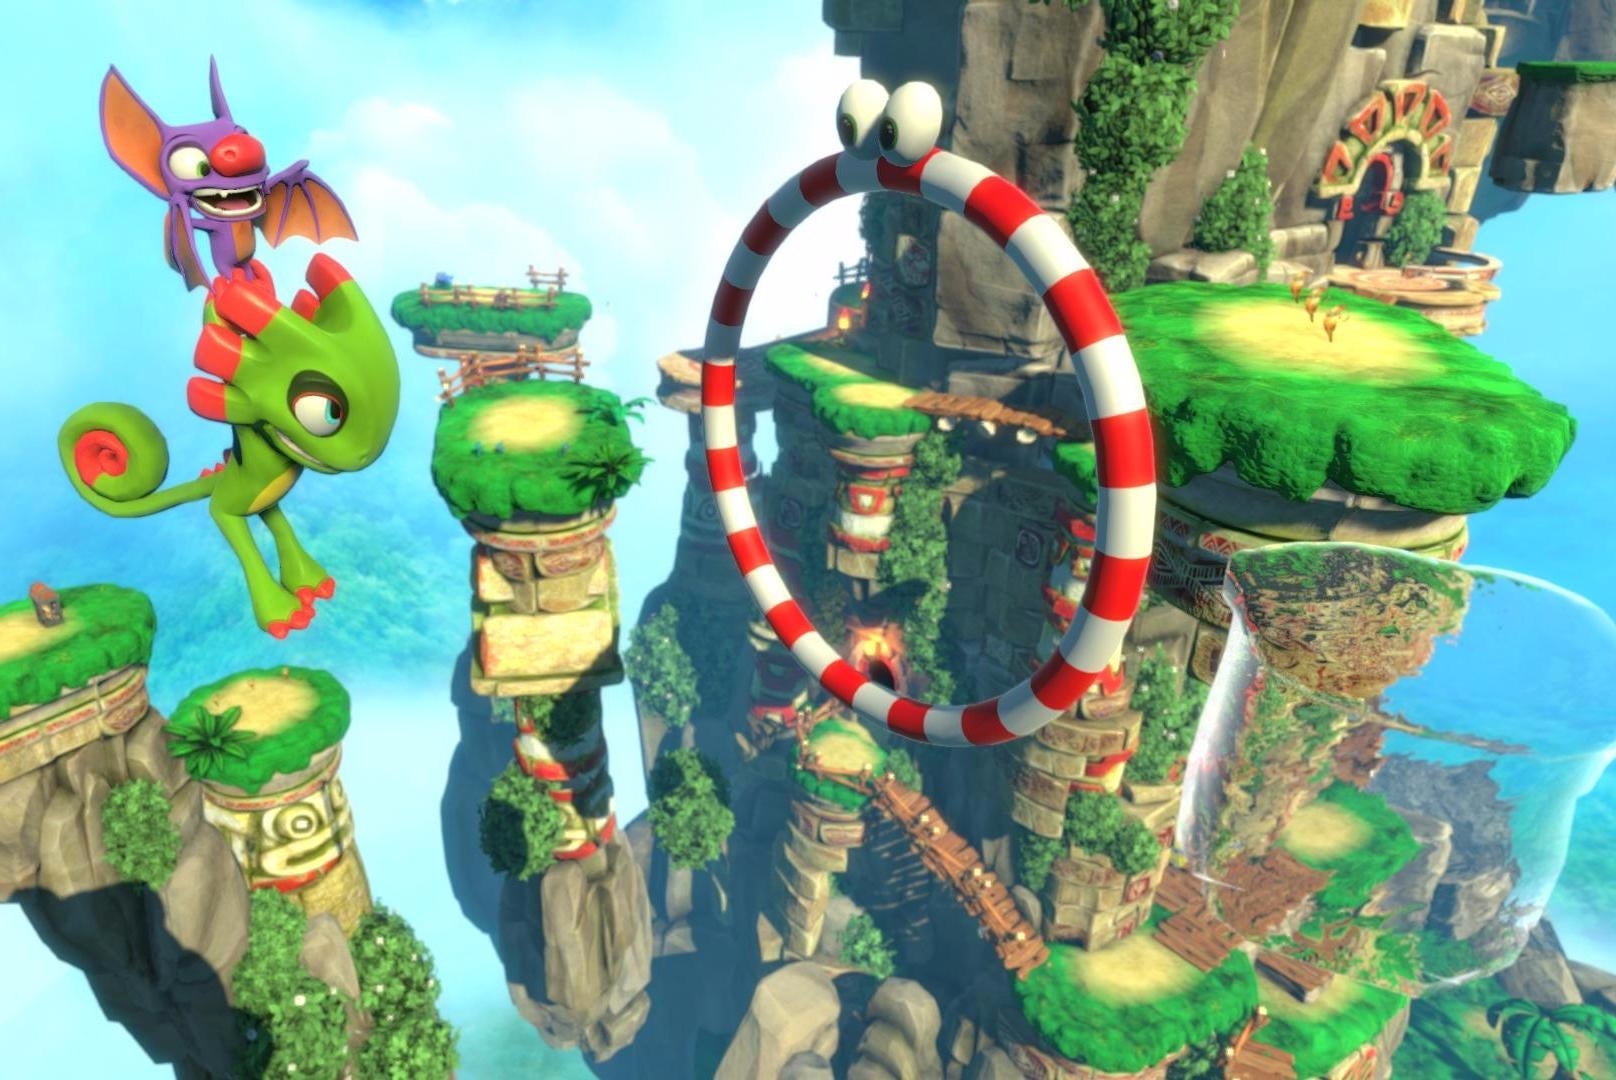 Image for Yooka-Laylee walkthrough and guide to all collectables, unlocking worlds and beating bosses in the retro-styled platformer